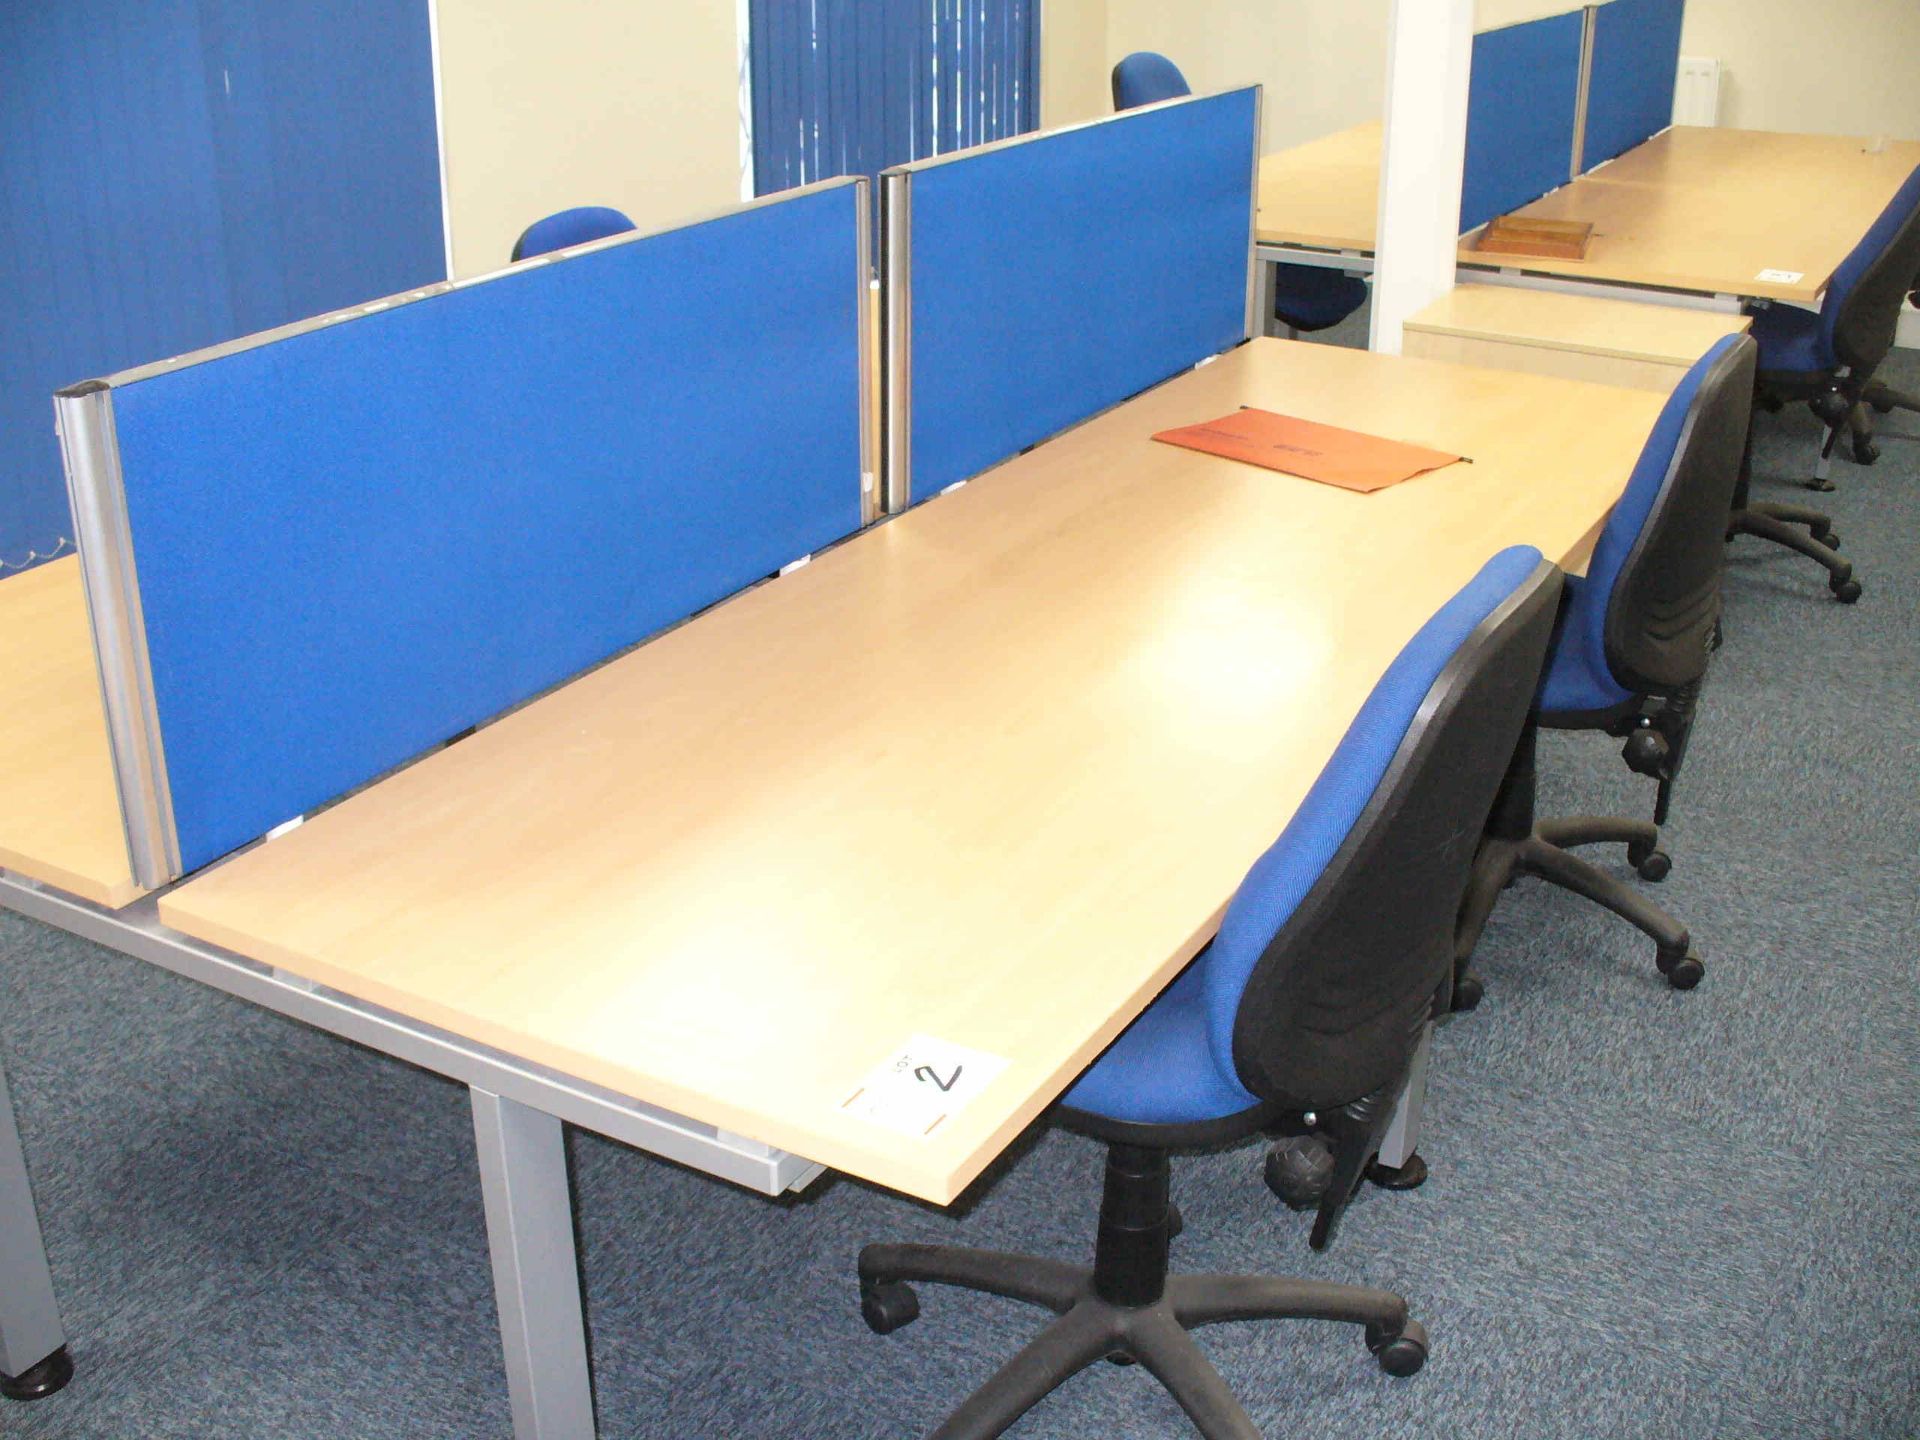 4 station WORK DESK 2.4M long x 1.6M wide with central divider, with 3 Chairs and 2 Pedestals